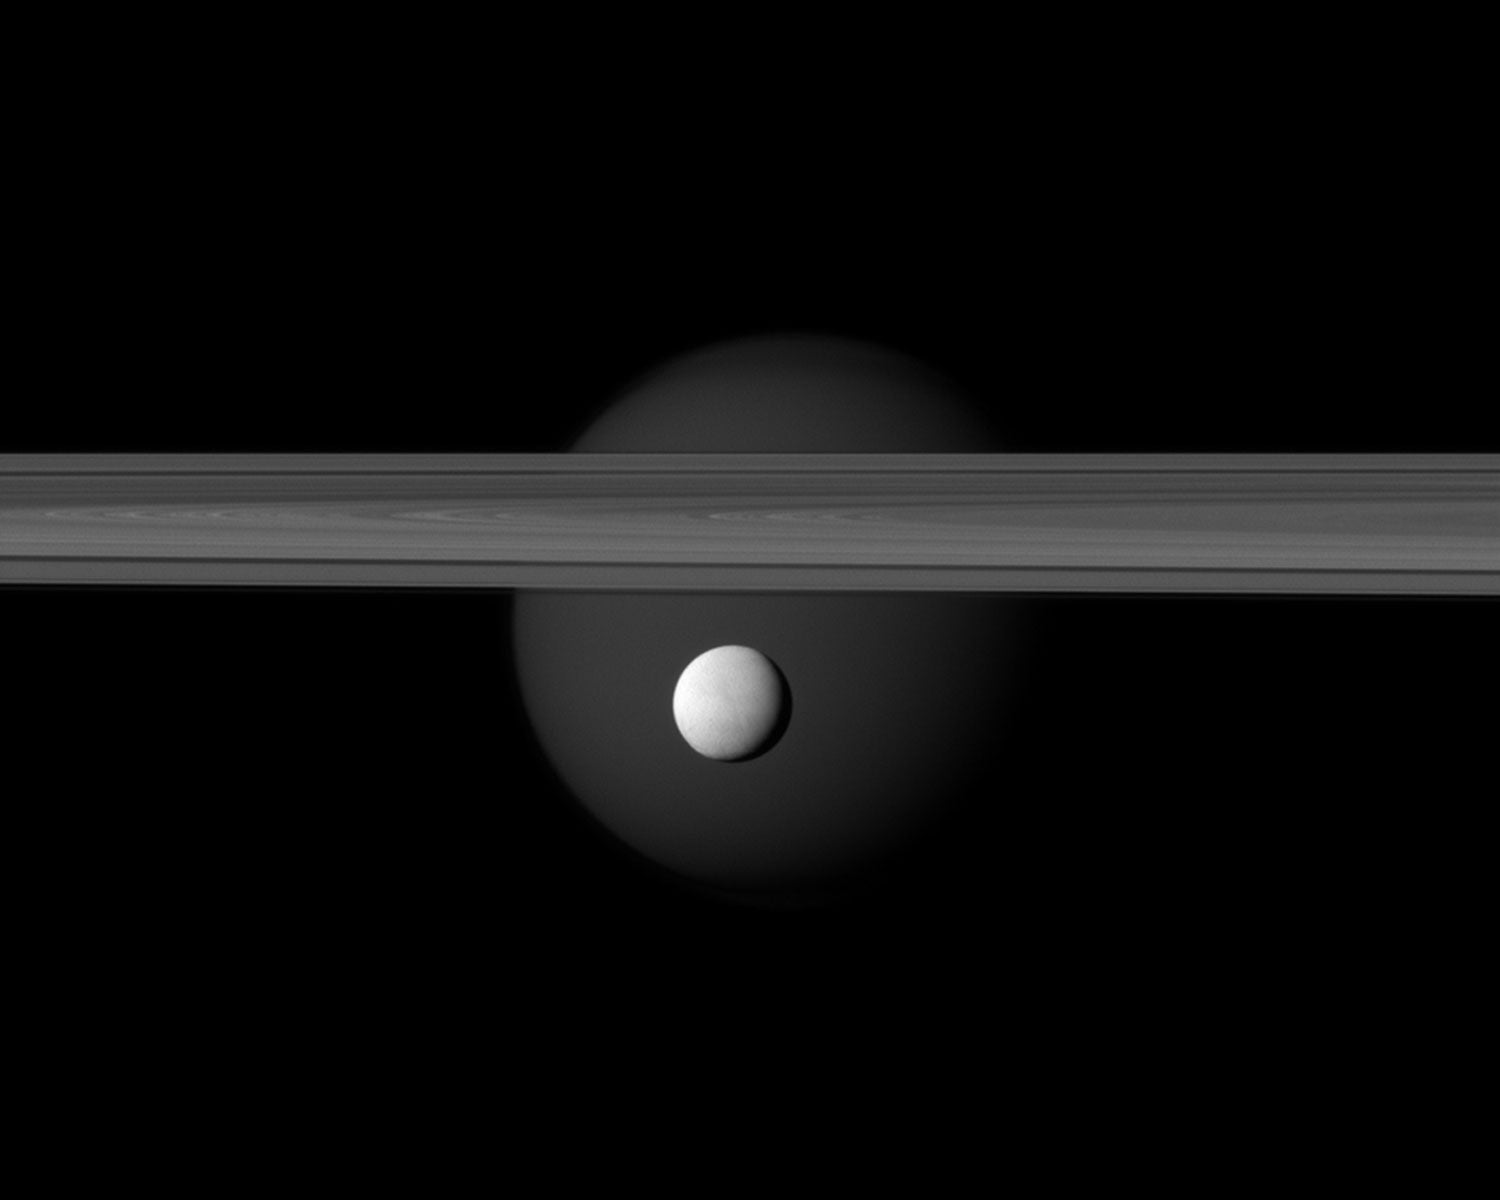 A brightly reflective Enceladus appears before Saturn's rings, while the planet's larger moon Titan looms in the distance